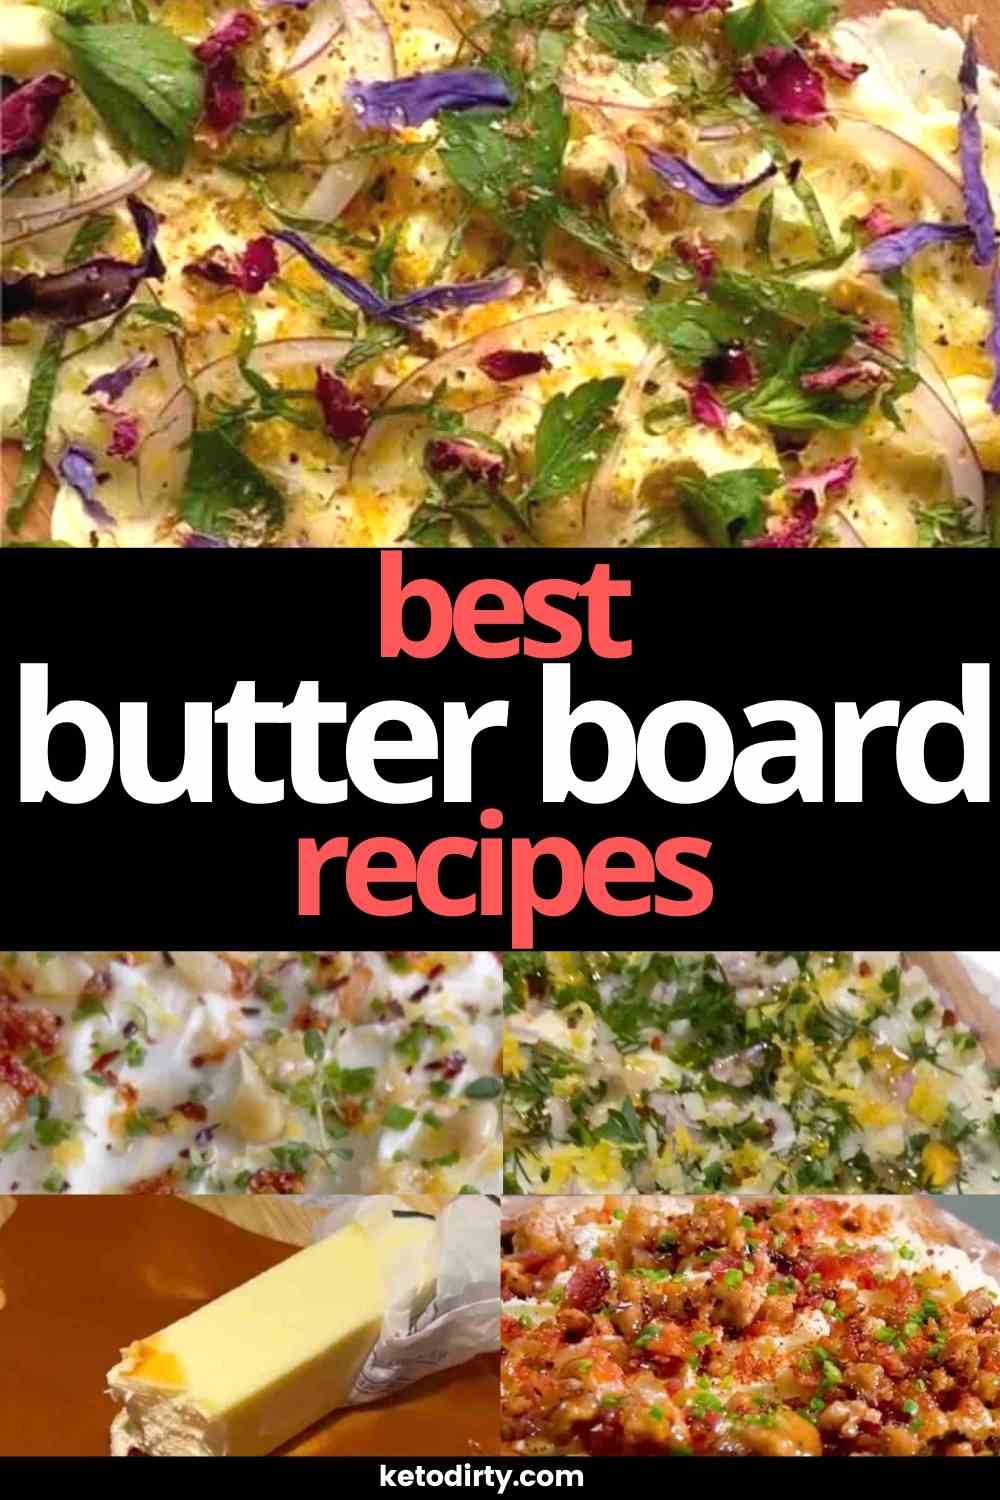 butter boards recipes